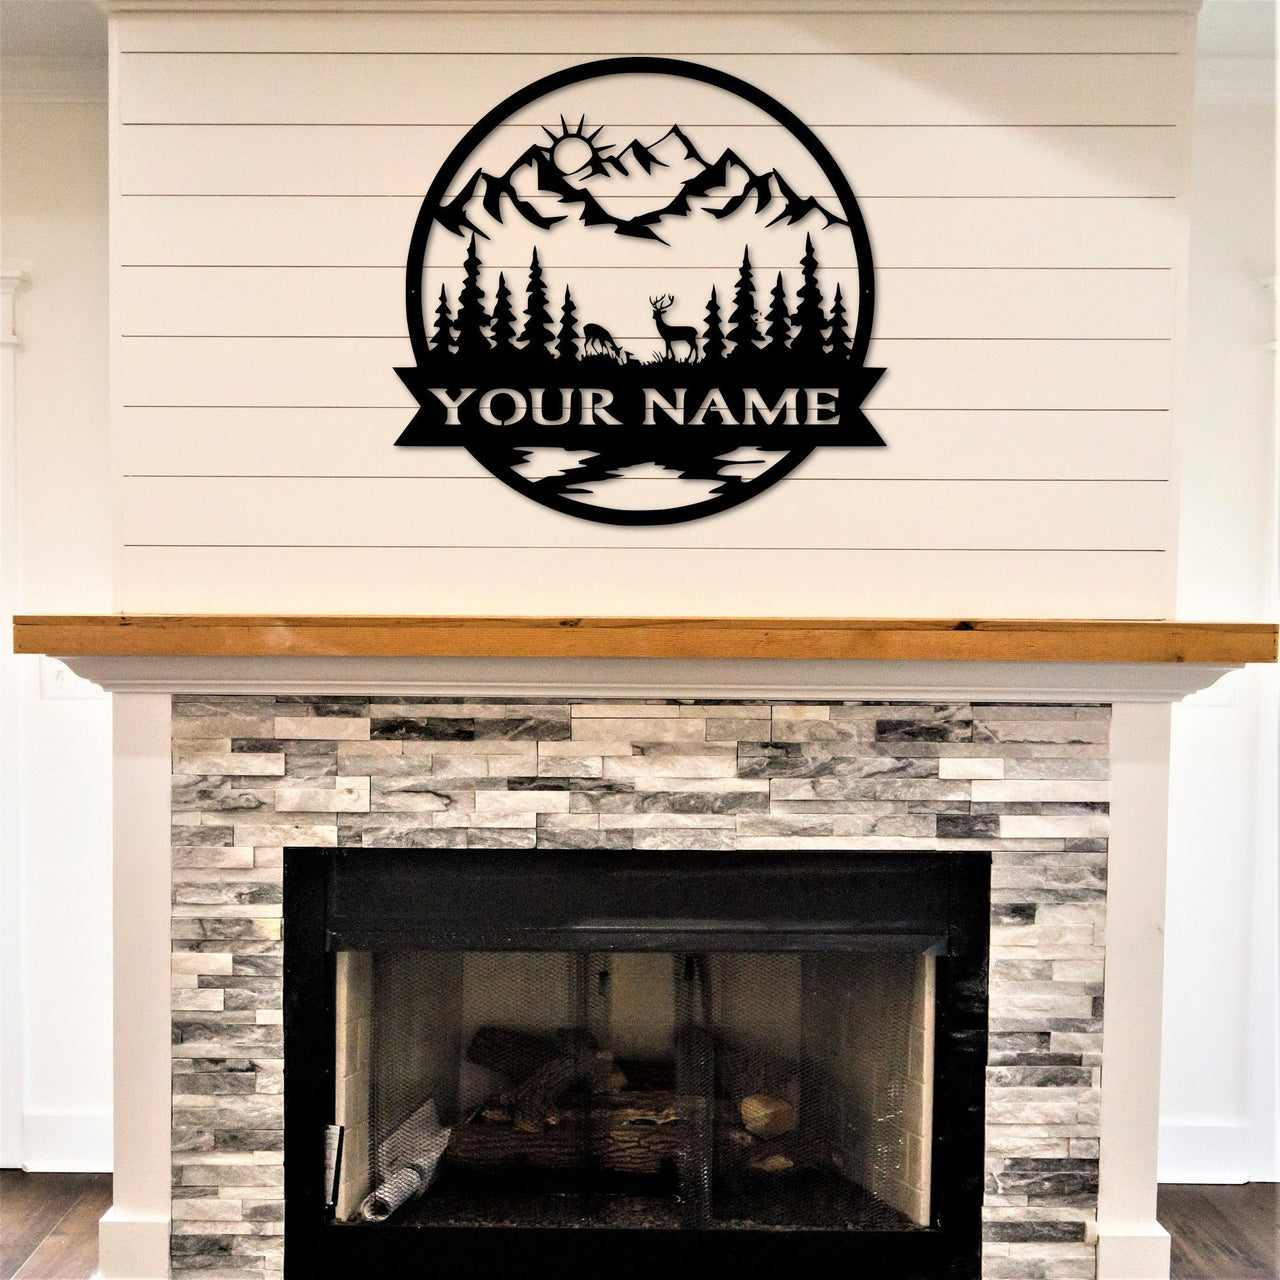 Deer Scene Name Sign | Metal Wall Art | Custom Metal Last Name Sign | The Great Outdoors Family Name Sign for Cabin | Housewarming Gift